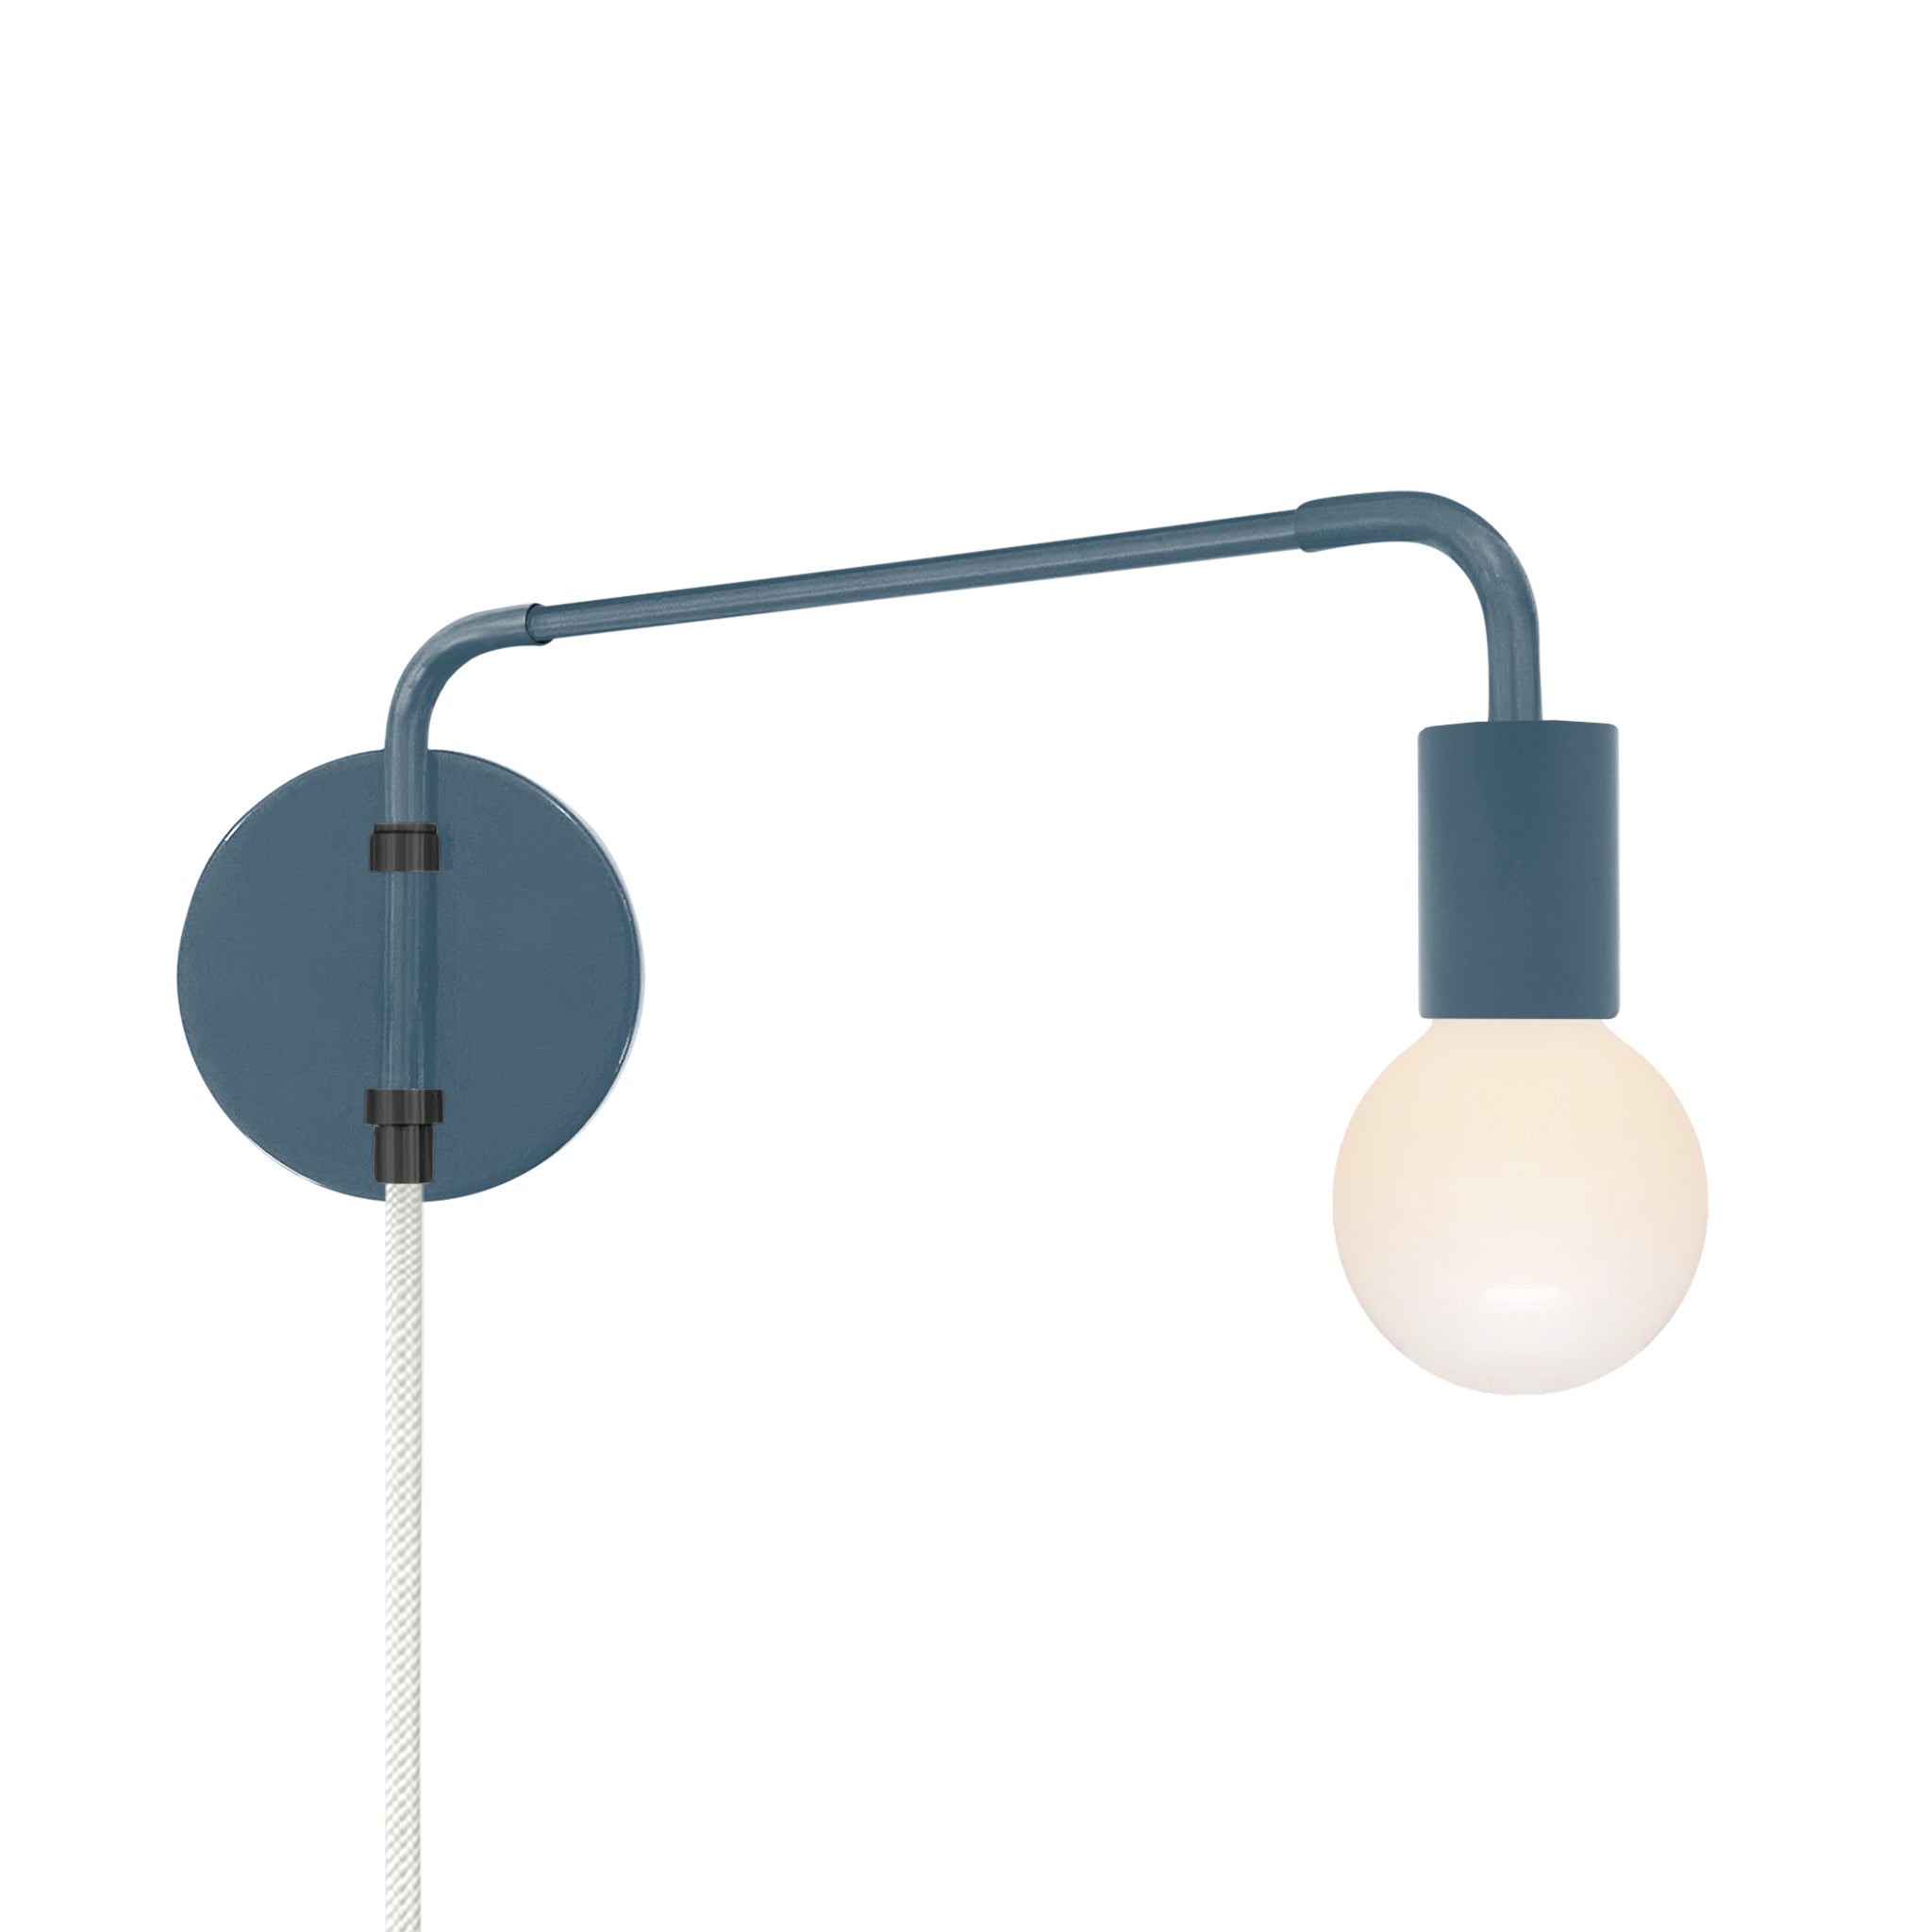 Black and slate blue color Sway plug-in sconce Dutton Brown lighting